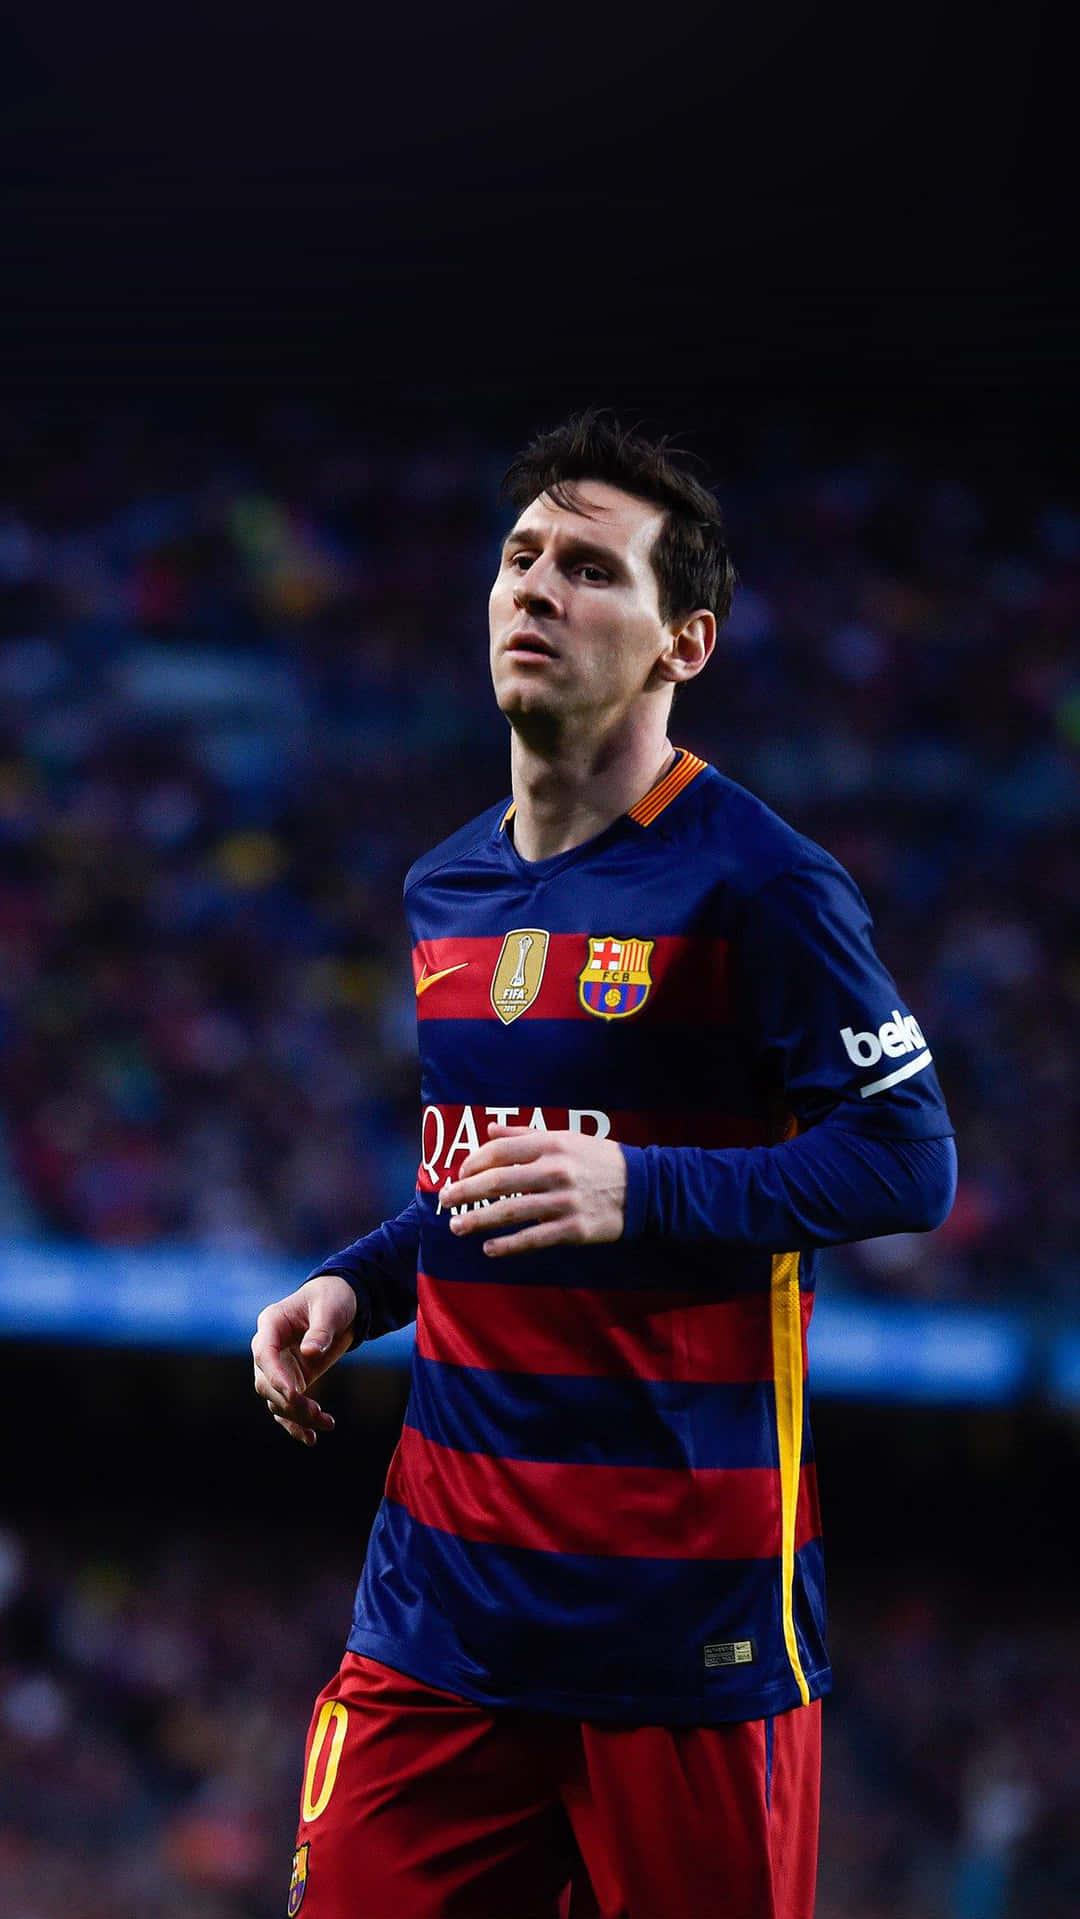 Argentine Football Star Lionel Messi Is The Face Of